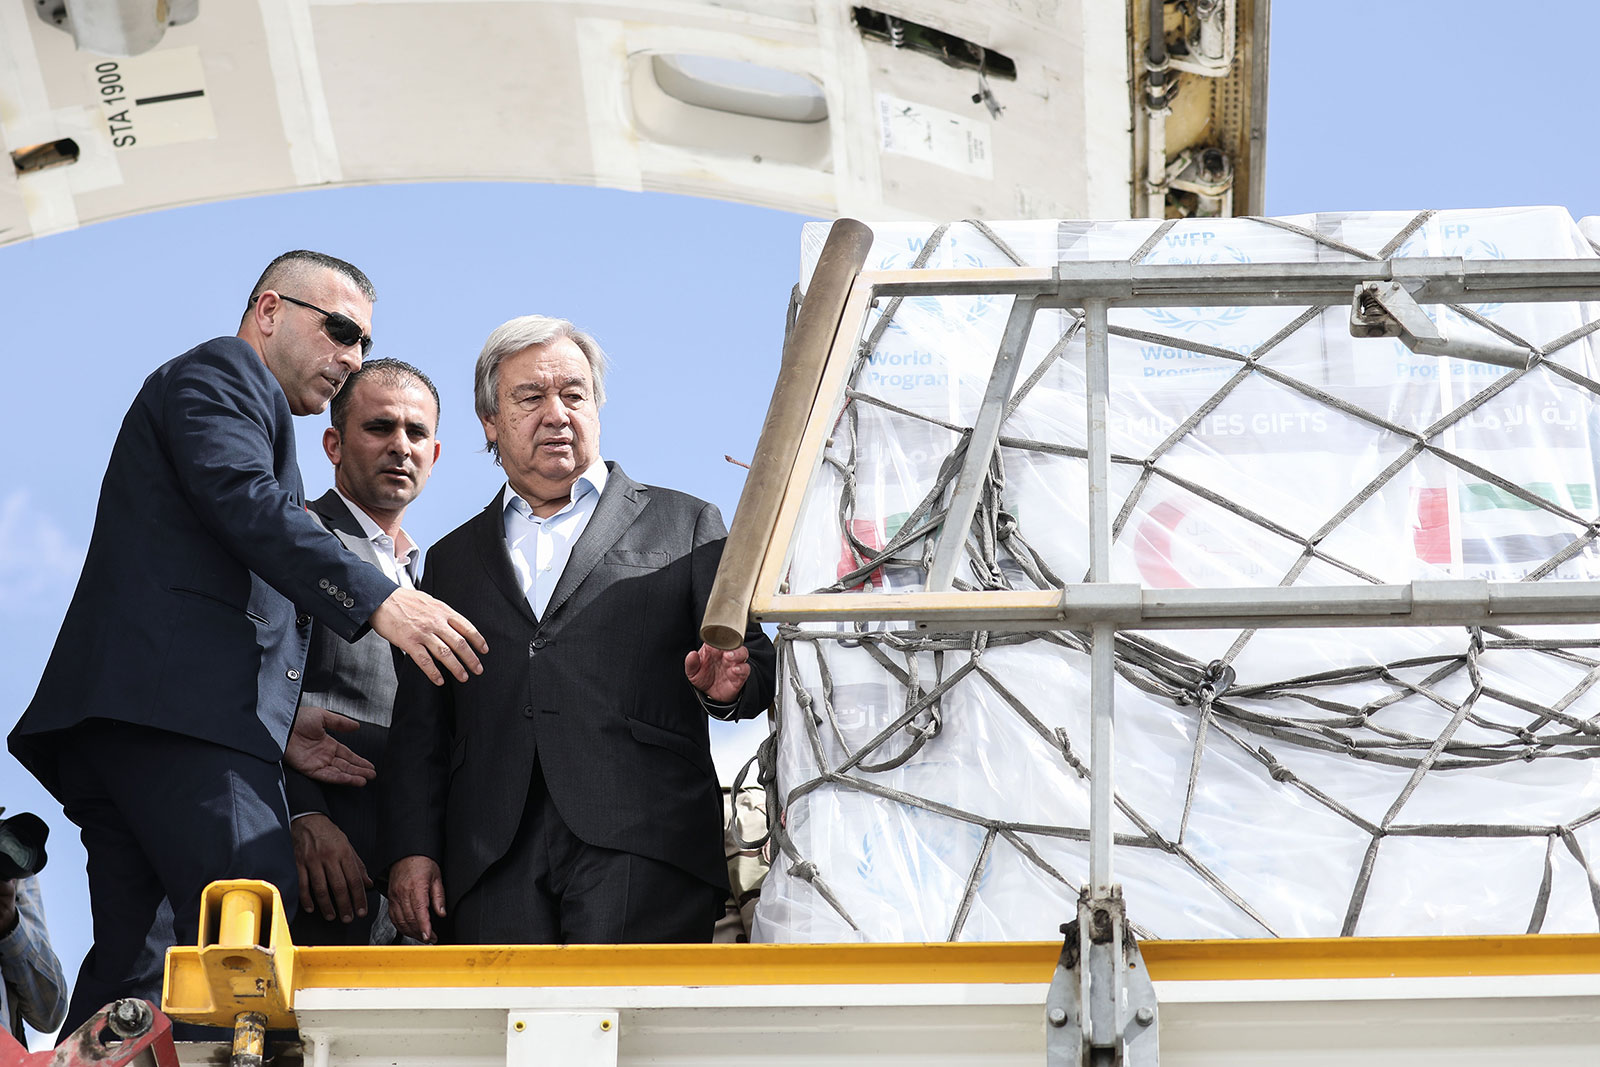 United Nations Secretary-General António Guterres inspects relief supplies at Egypt's El Arish International Airport before his visit to the Rafah border crossing on Friday.